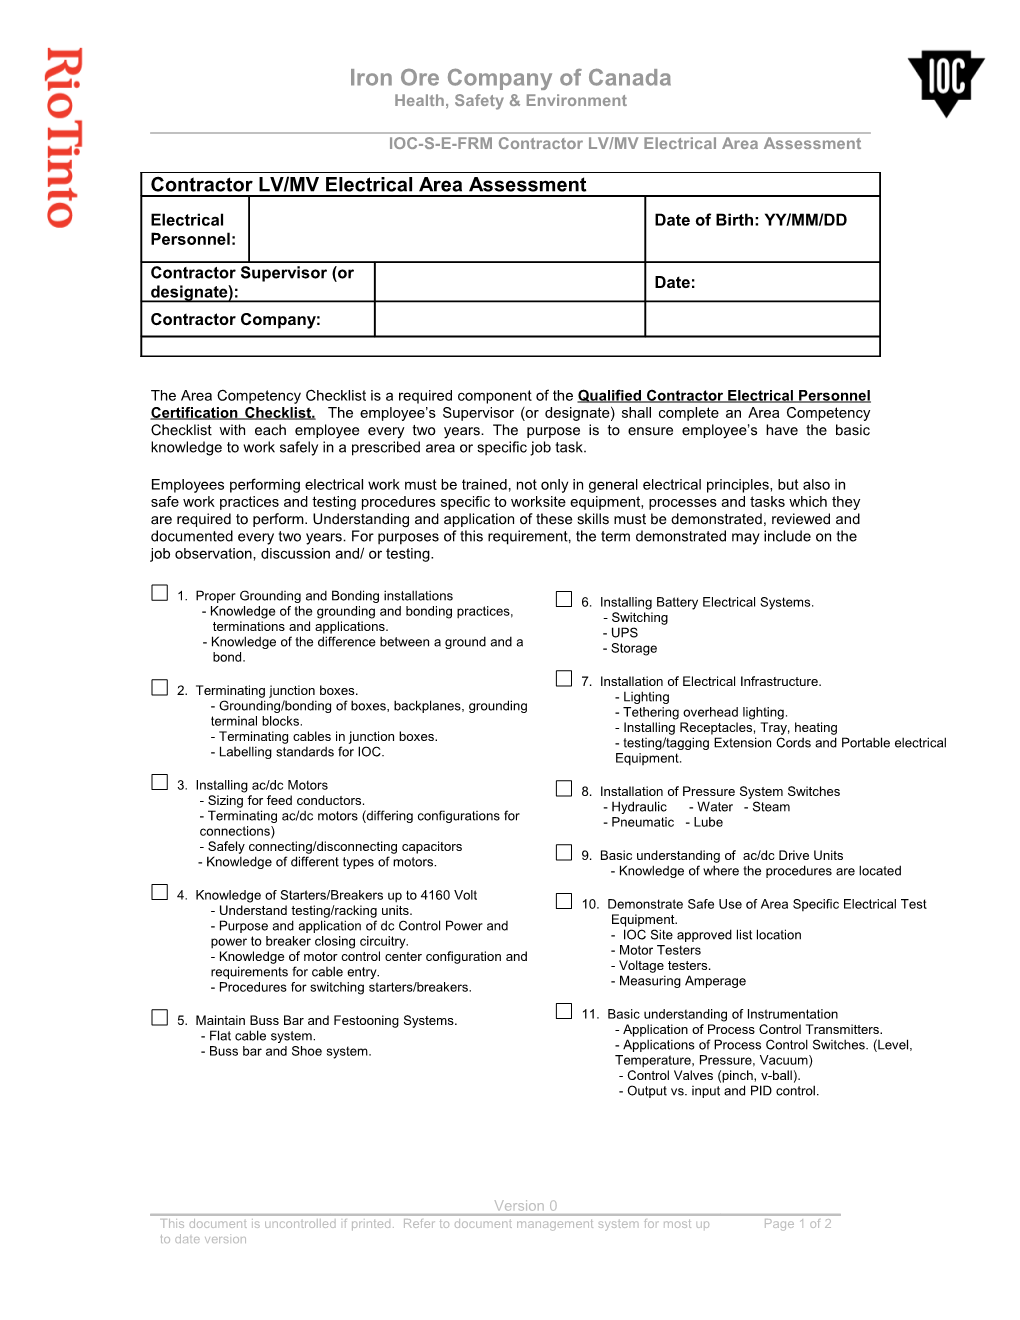 Qualified Electrical Personnel Recertification Checklist